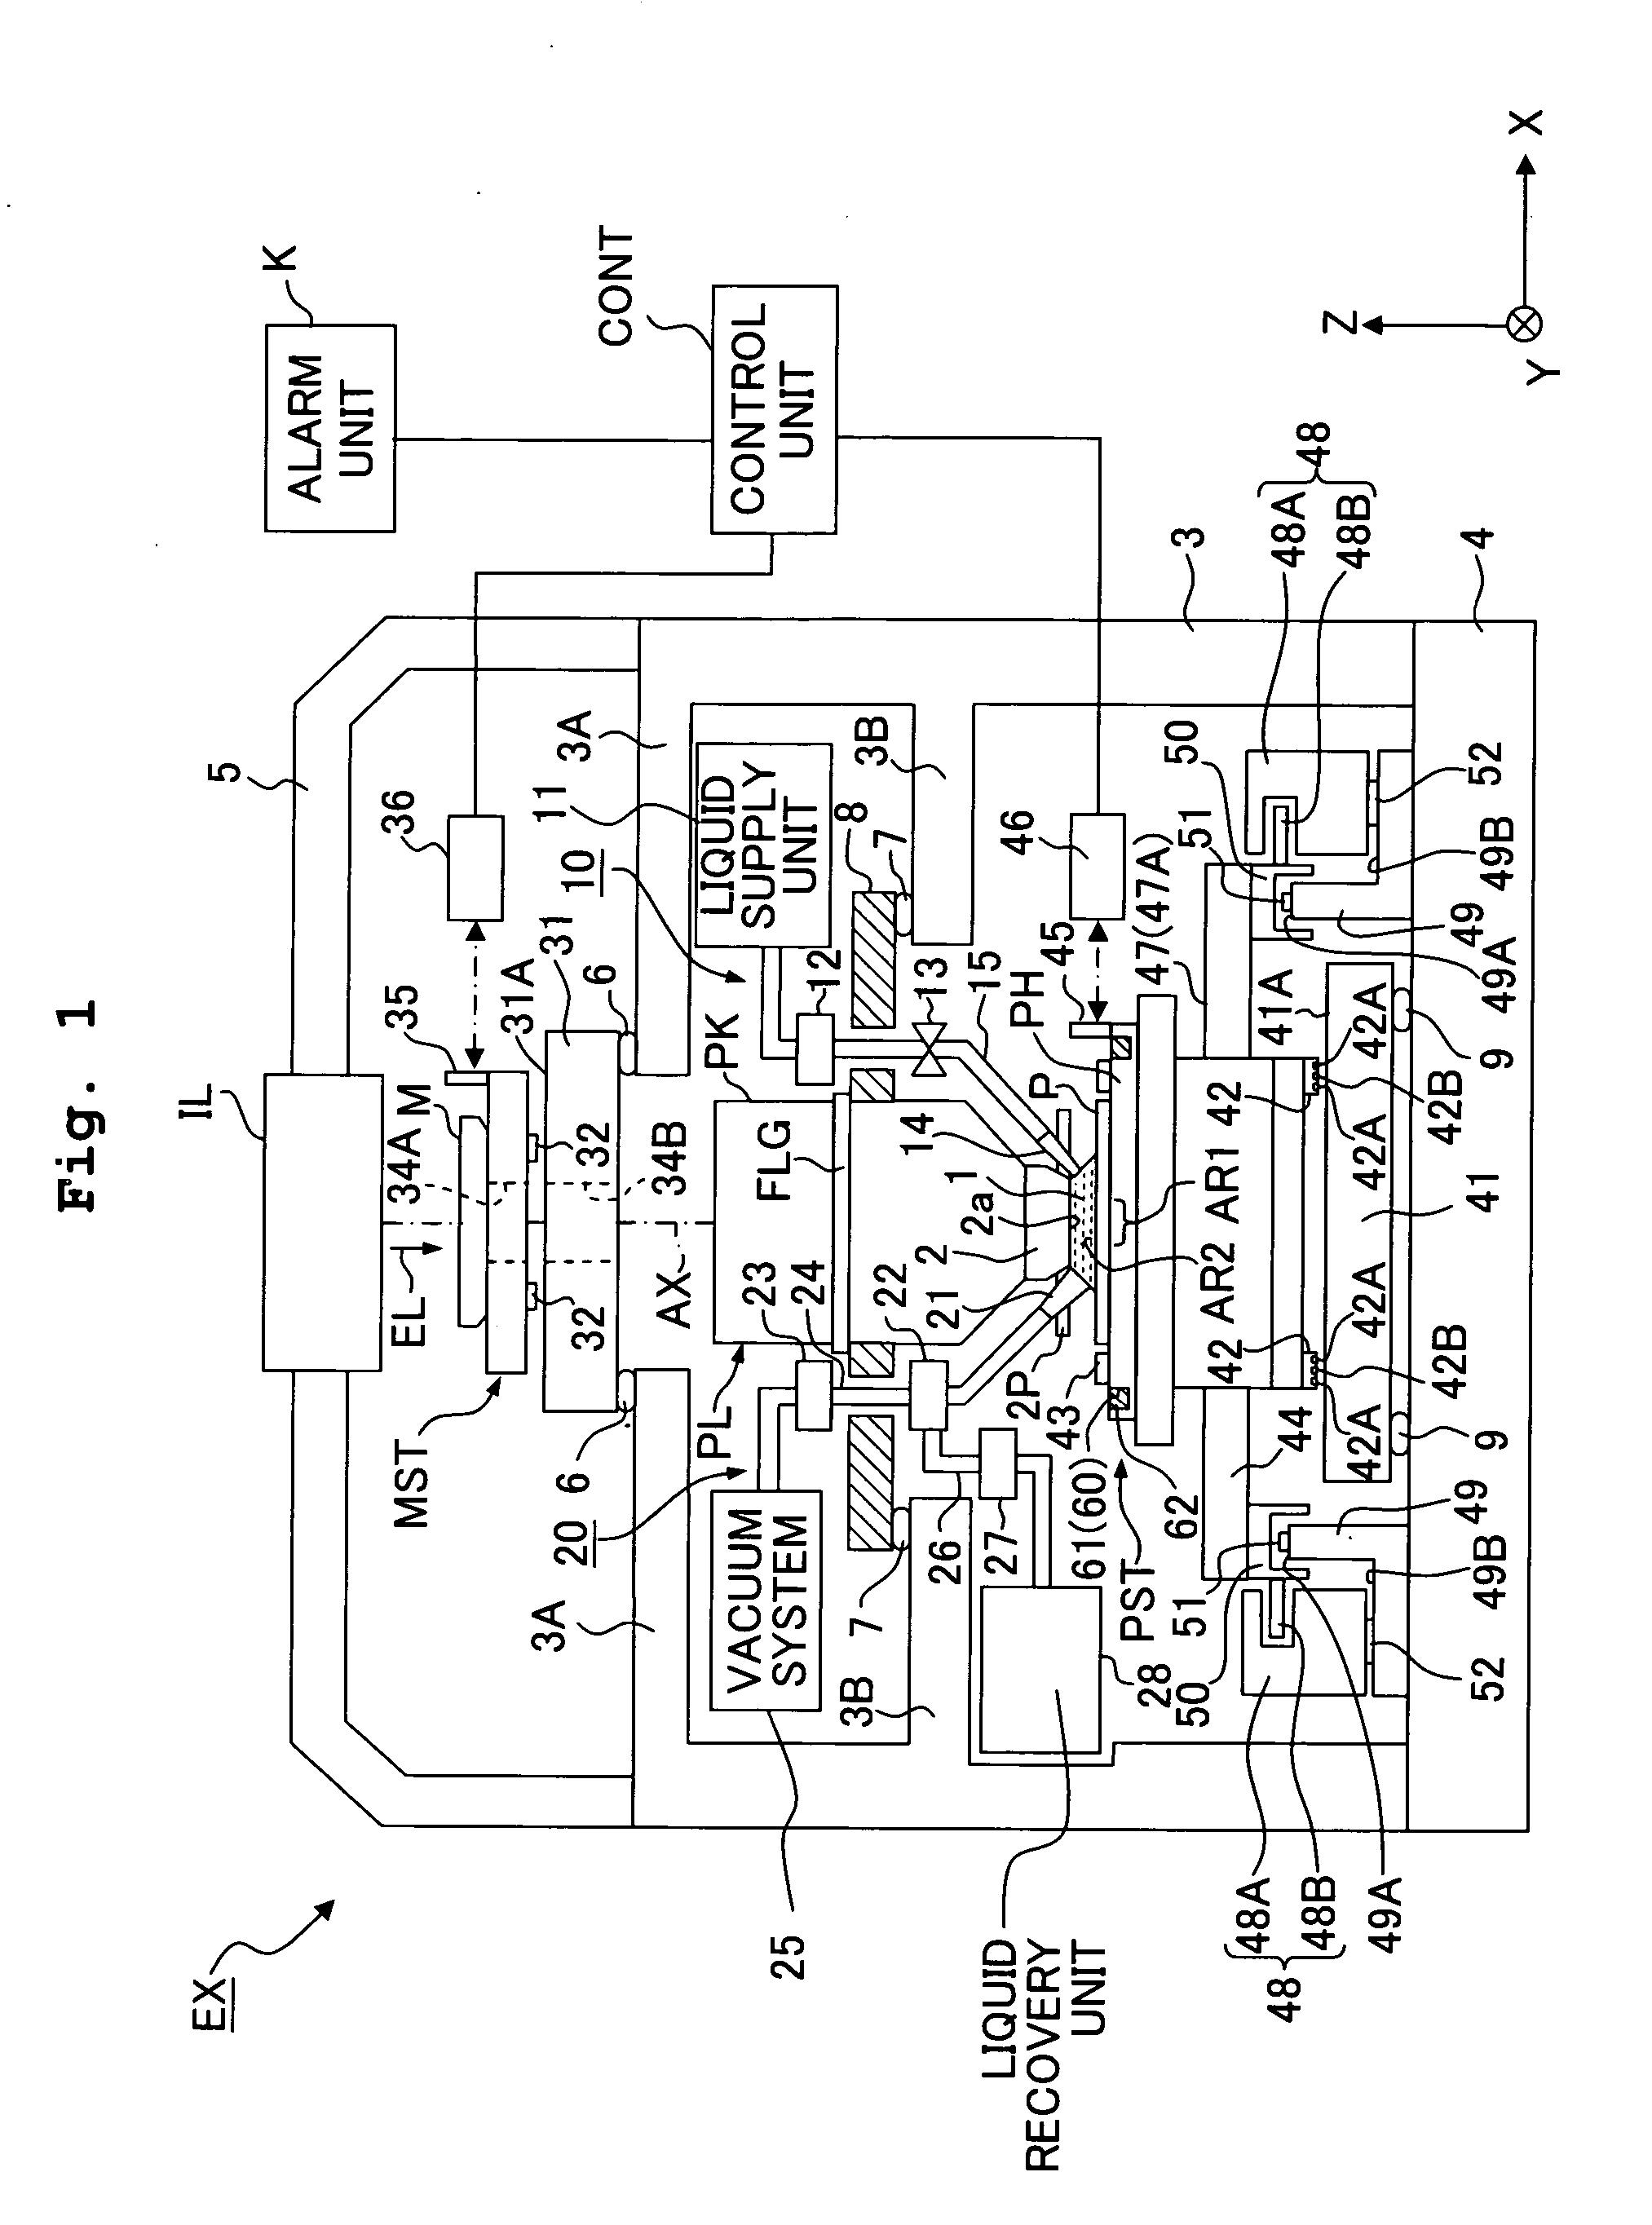 Exposure apparatus, method for producing device, and method for controlling exposure apparatus